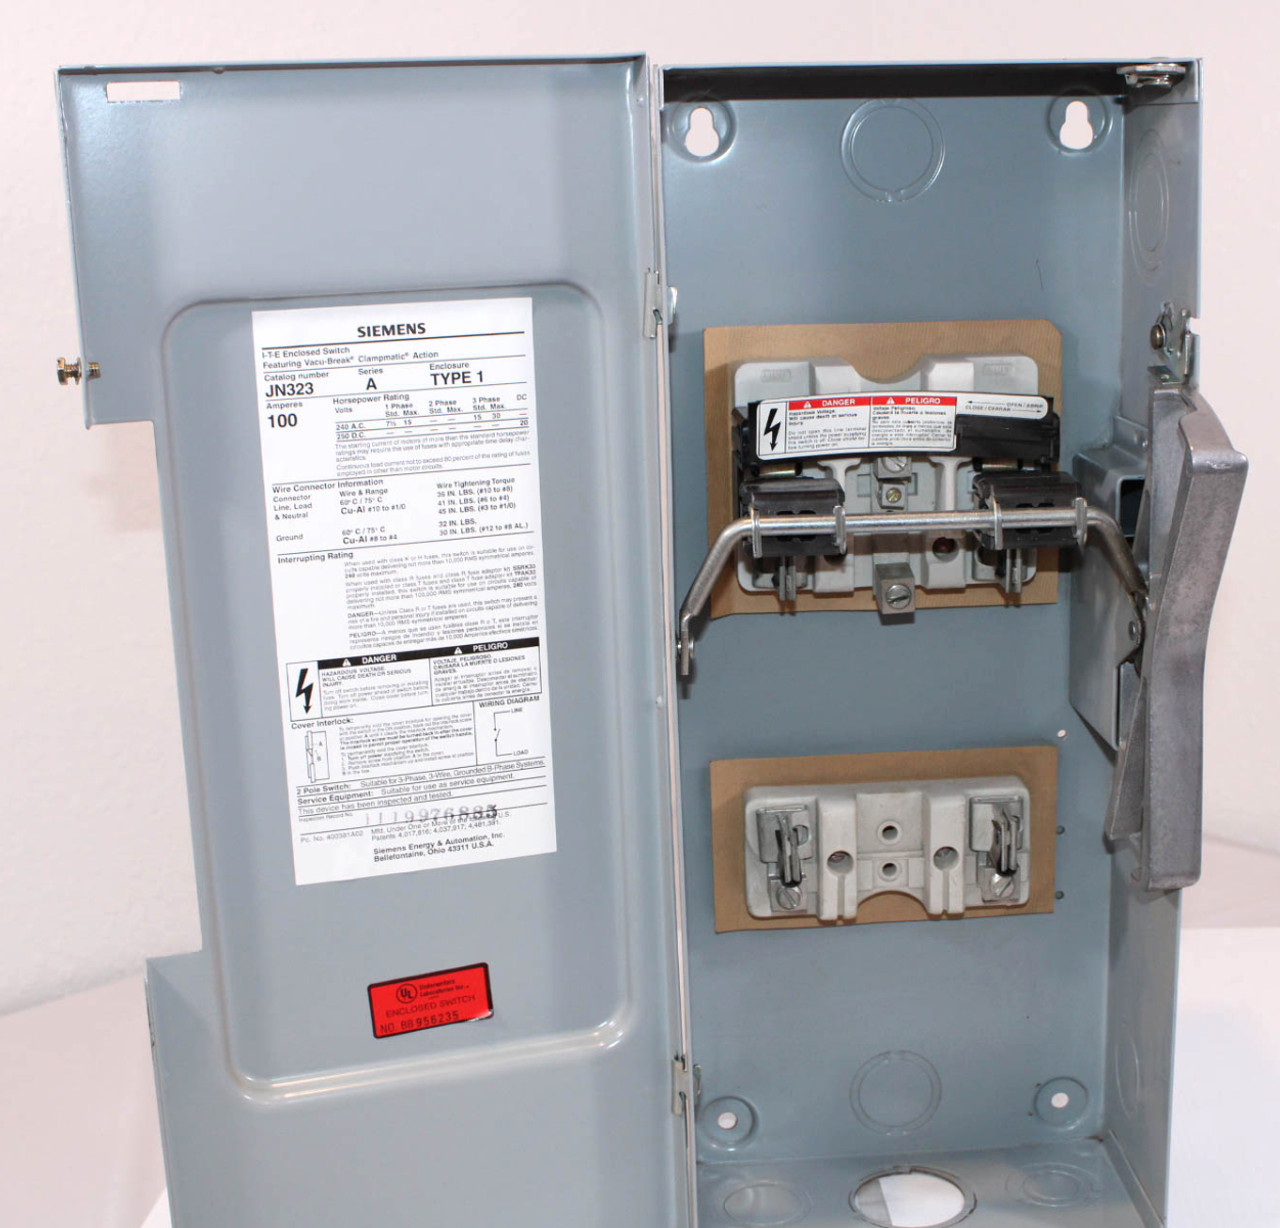 Siemens JN323 Vacu-Break Switch 100A 240V 3P NEMA: 1 Fusible: Yes With Clampmatic Contacts